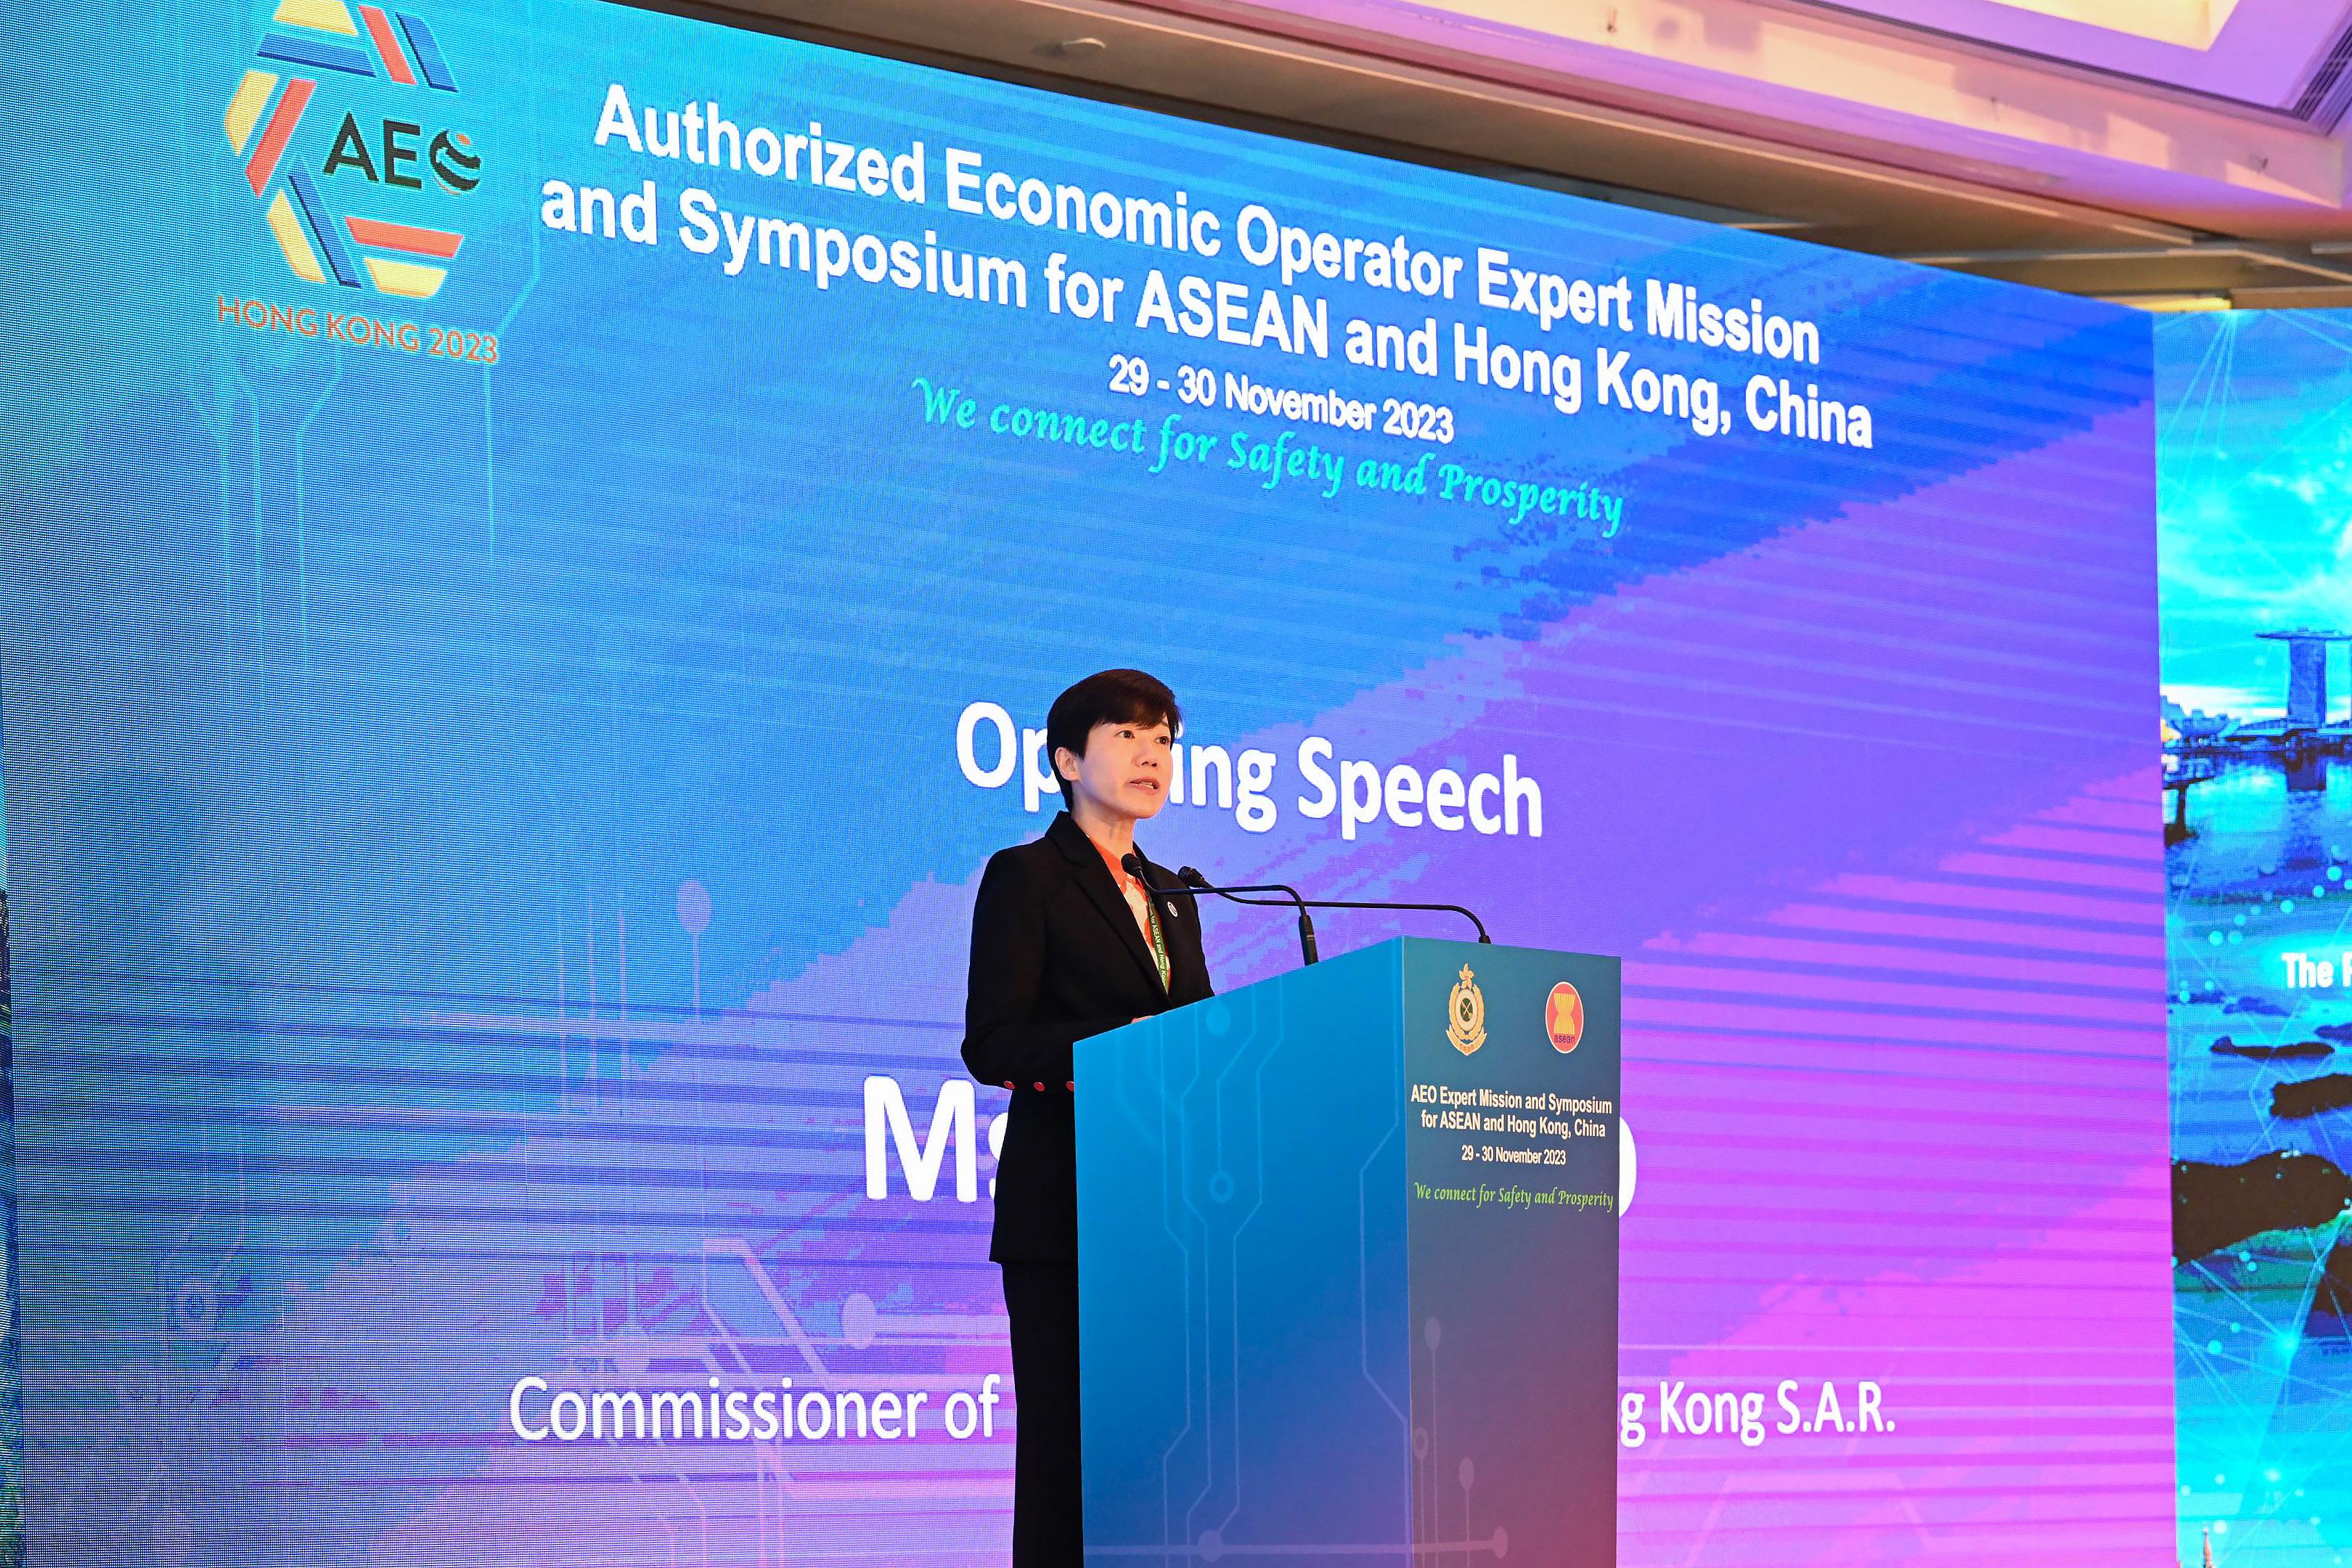 The Customs and Excise Department of Hong Kong today (November 29) and tomorrow (November 30) is holding the AEO Expert Mission and Symposium for ASEAN and Hong Kong, China. Photo shows the Commissioner of Customs and Excise, Ms Louise Ho, delivering an opening speech at the Expert Mission held today.

